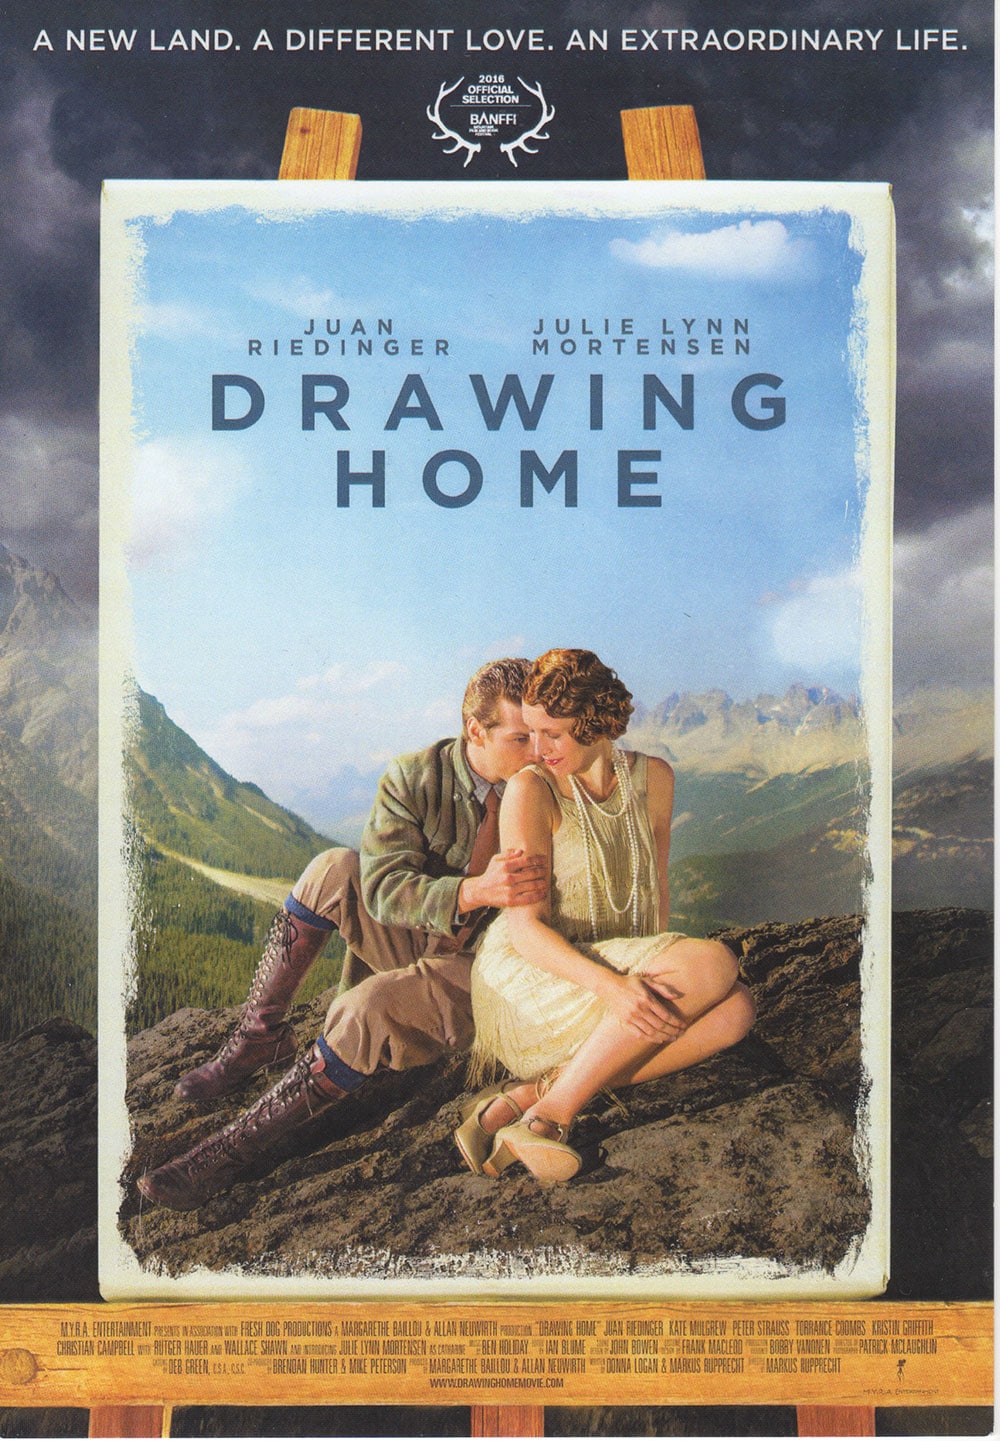 poster for the film "Drawing Home"